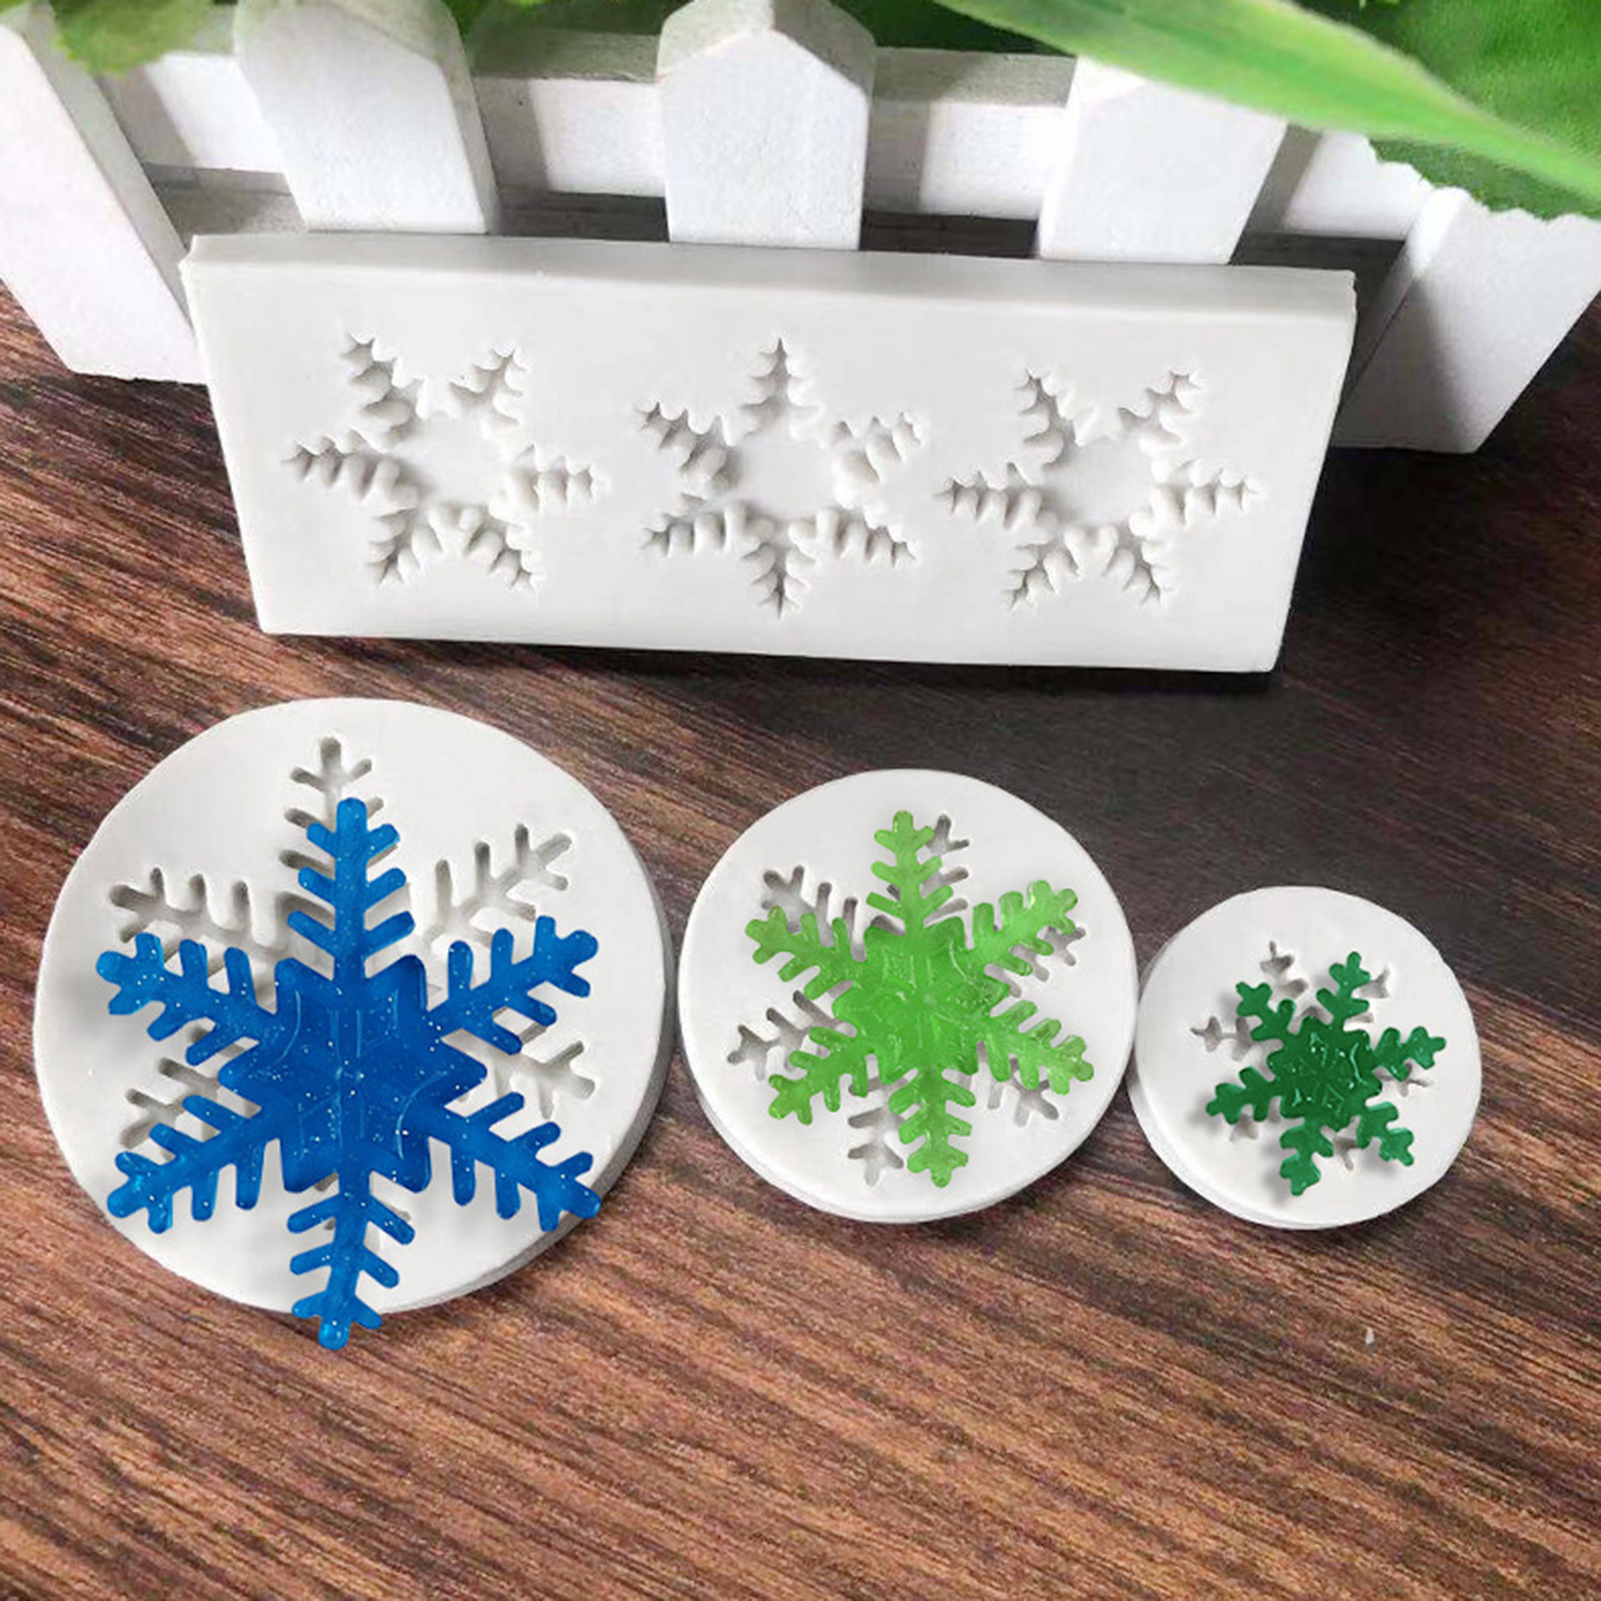 Yesbay Snowflake Mold Chocolate Mould Food Grade Kitchen Baking Christmas  Party Celebration Birthday Cookie Mold for Baker 